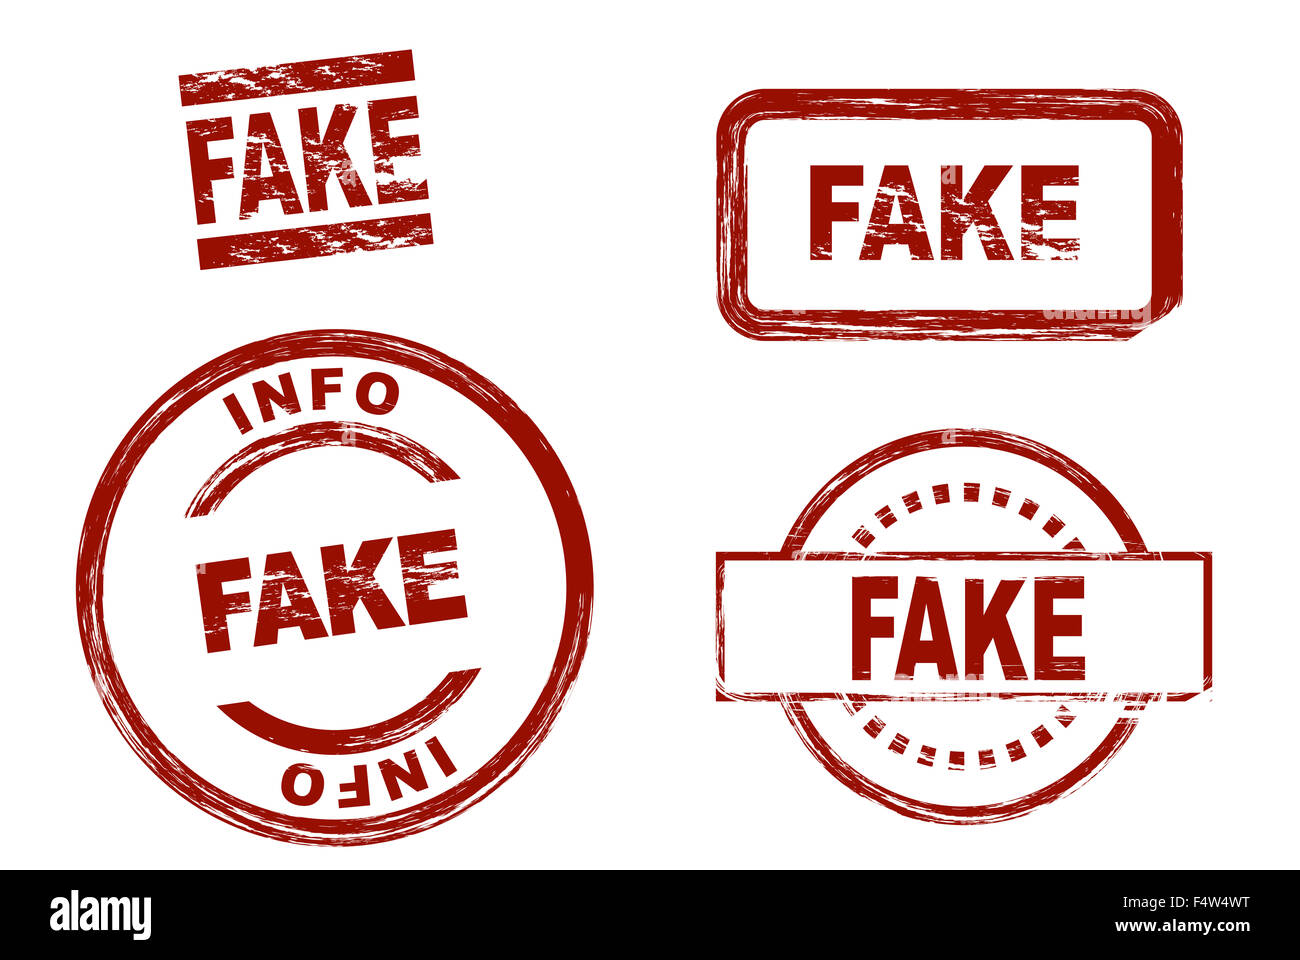 Set of stylized red stamps showing the term fake. All on white background. Stock Photo